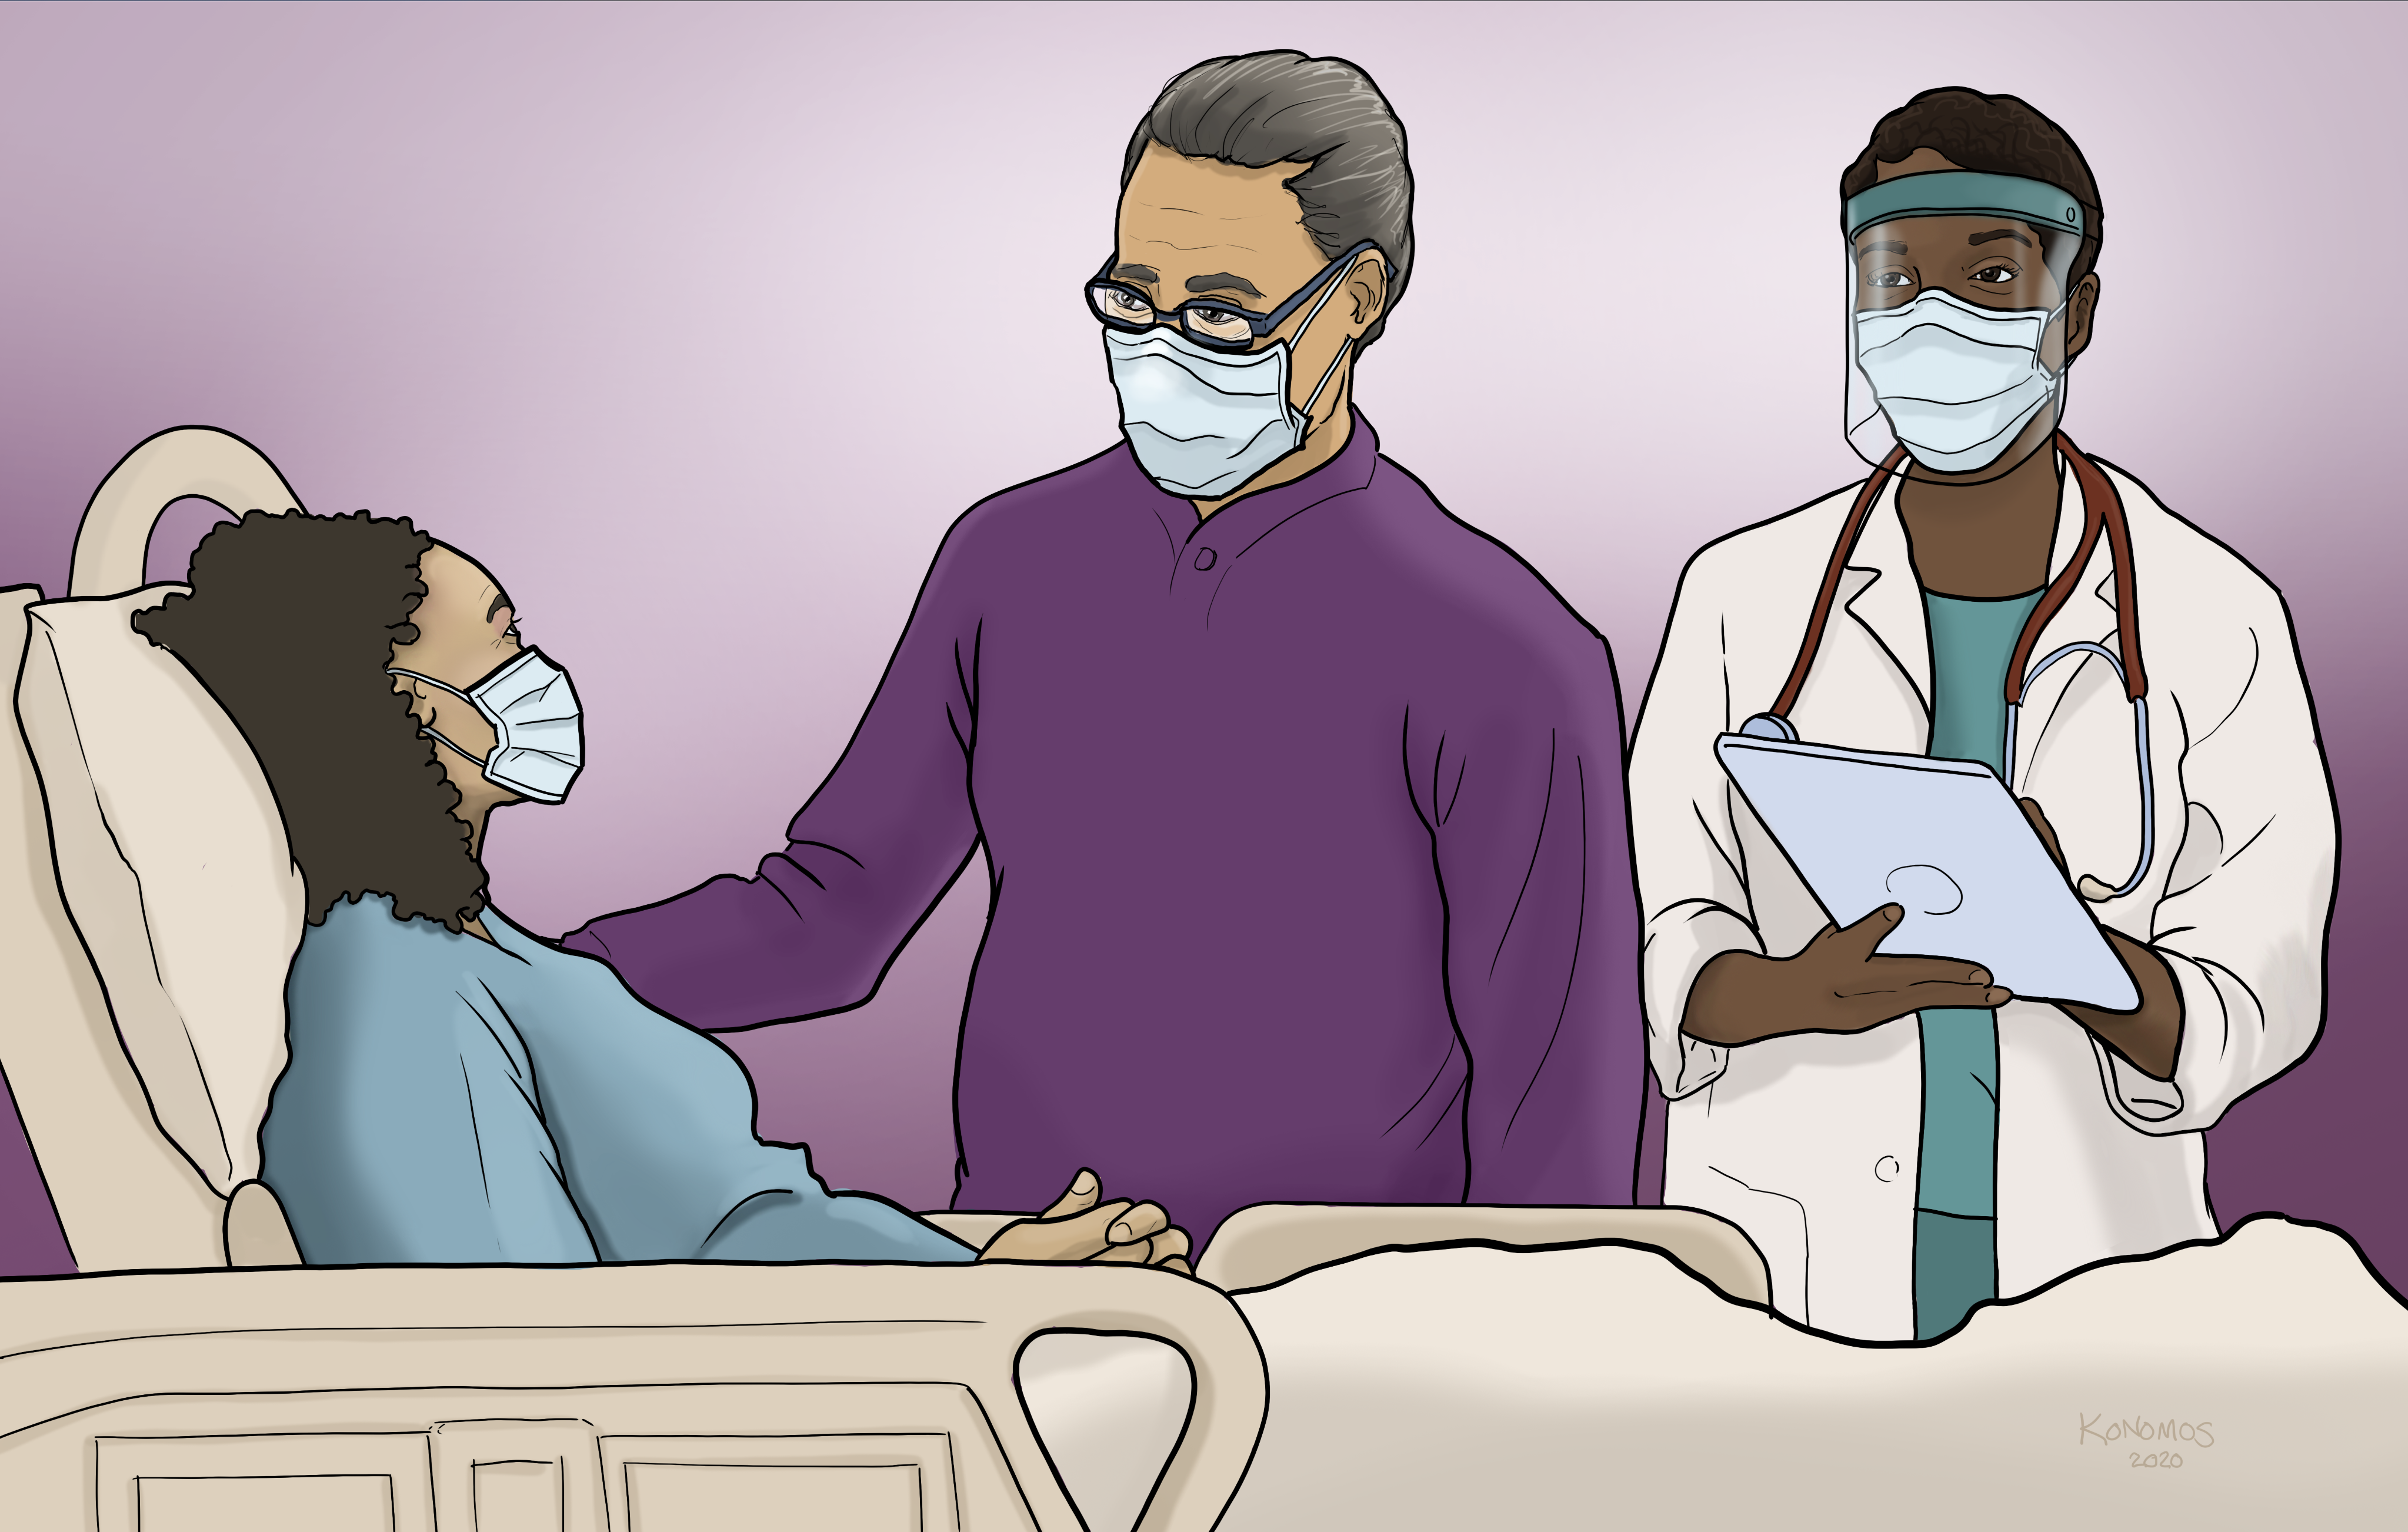 Illustration of care partner offering support to patient with provider nearby to care for medical needs of patient